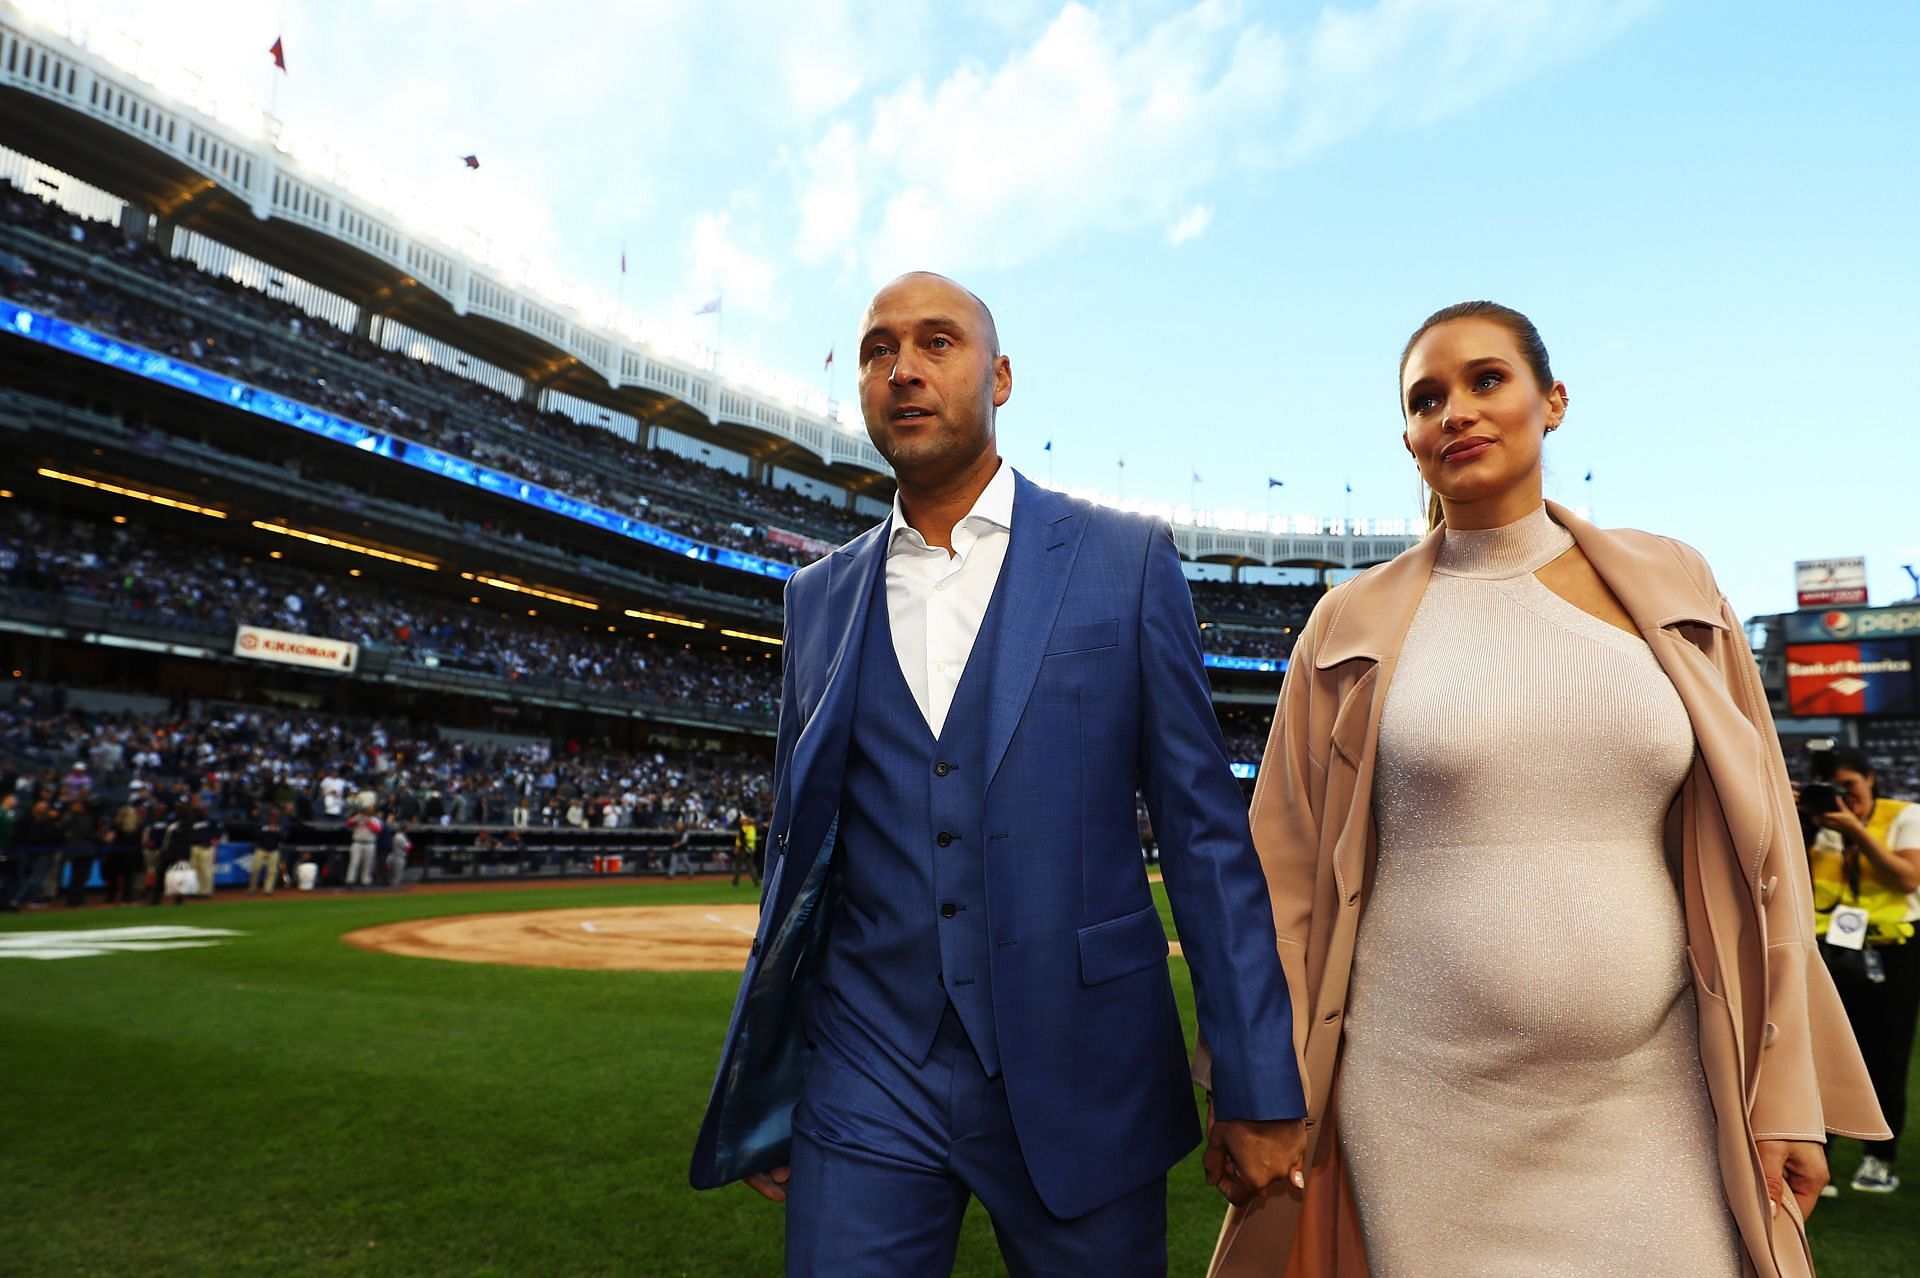 Derek Jeter: I had a job to do and I did it. I played to winsee you in  The Show